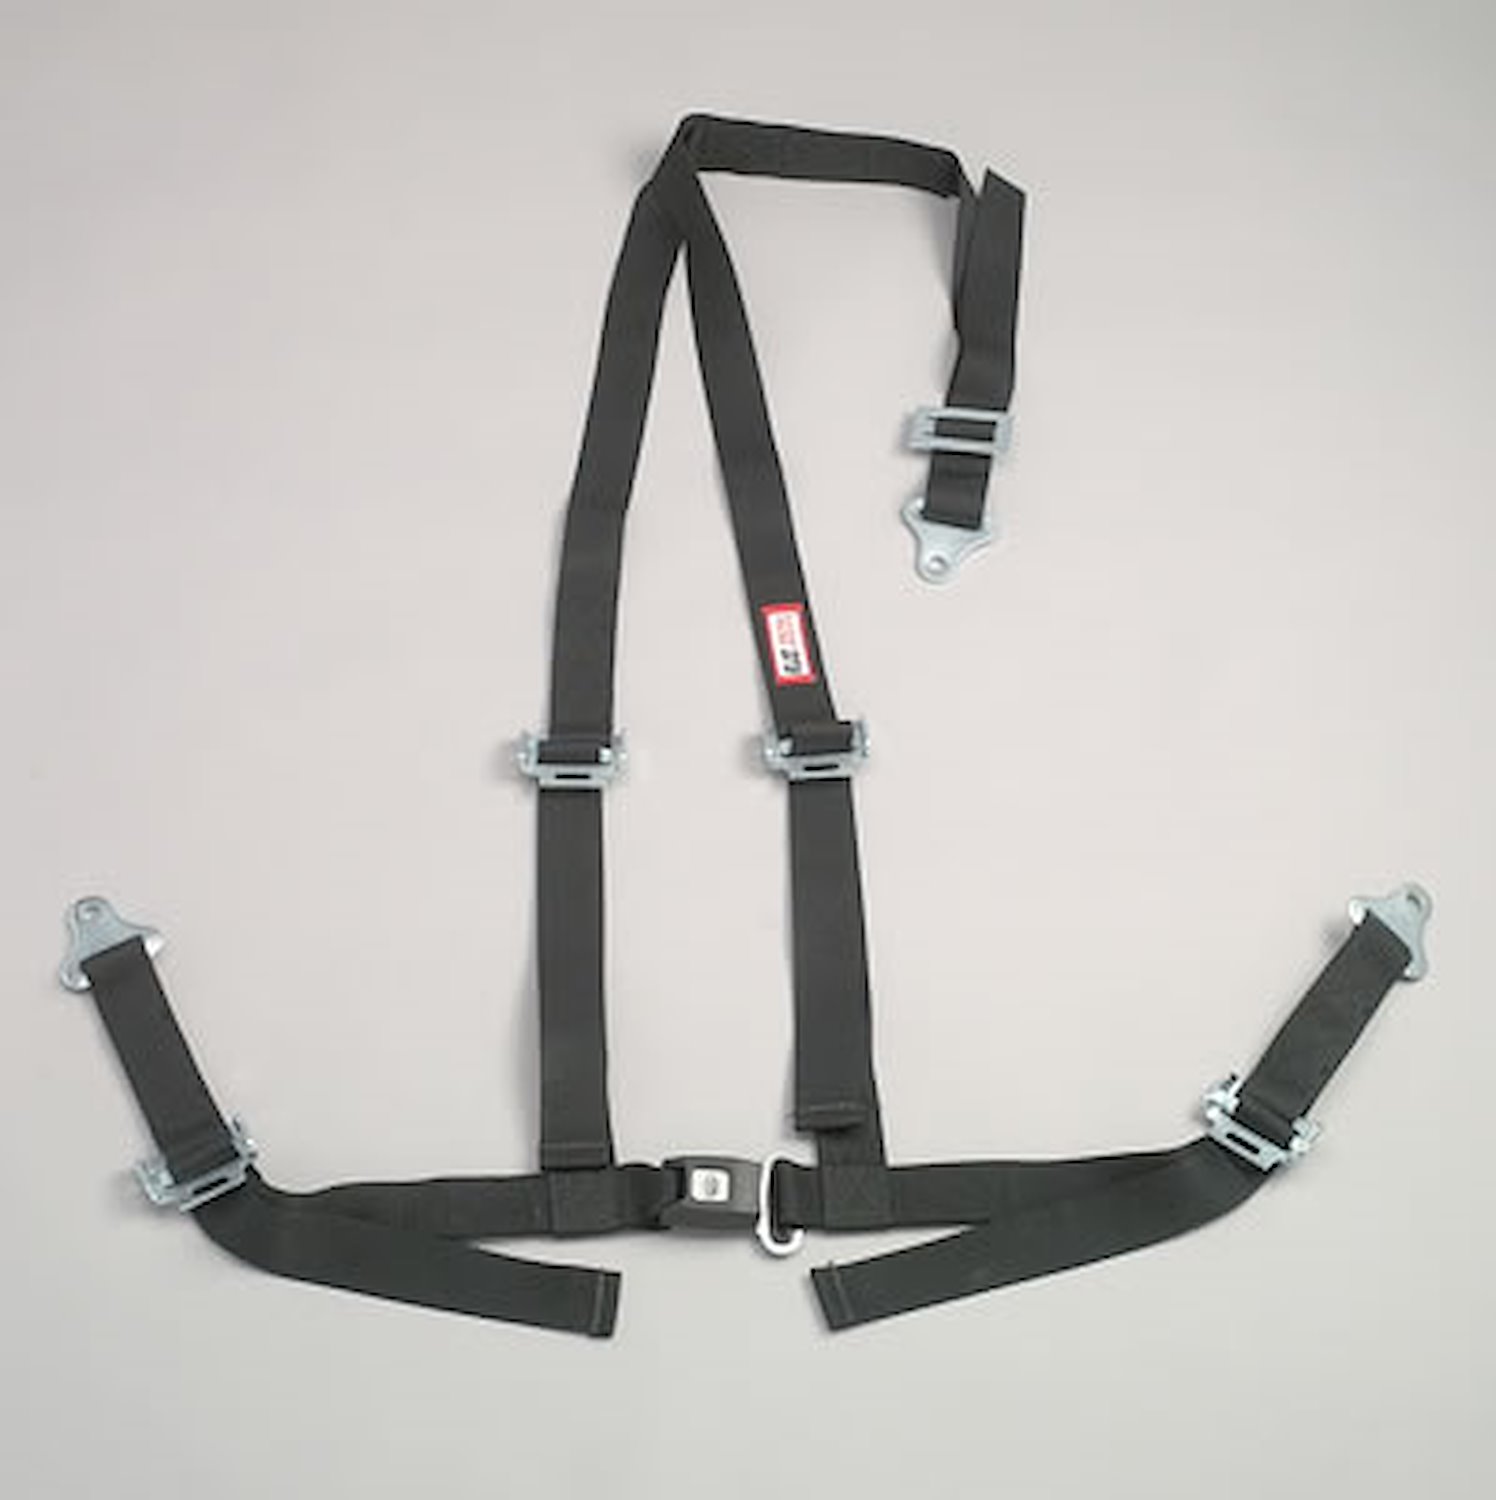 NON-SFI B&T HARNESS 2 PULL DOWN Lap Belt 2 S. H. V ROLL BAR Mount ALL SNAP ENDS w/STERNUM STRAP GRAY